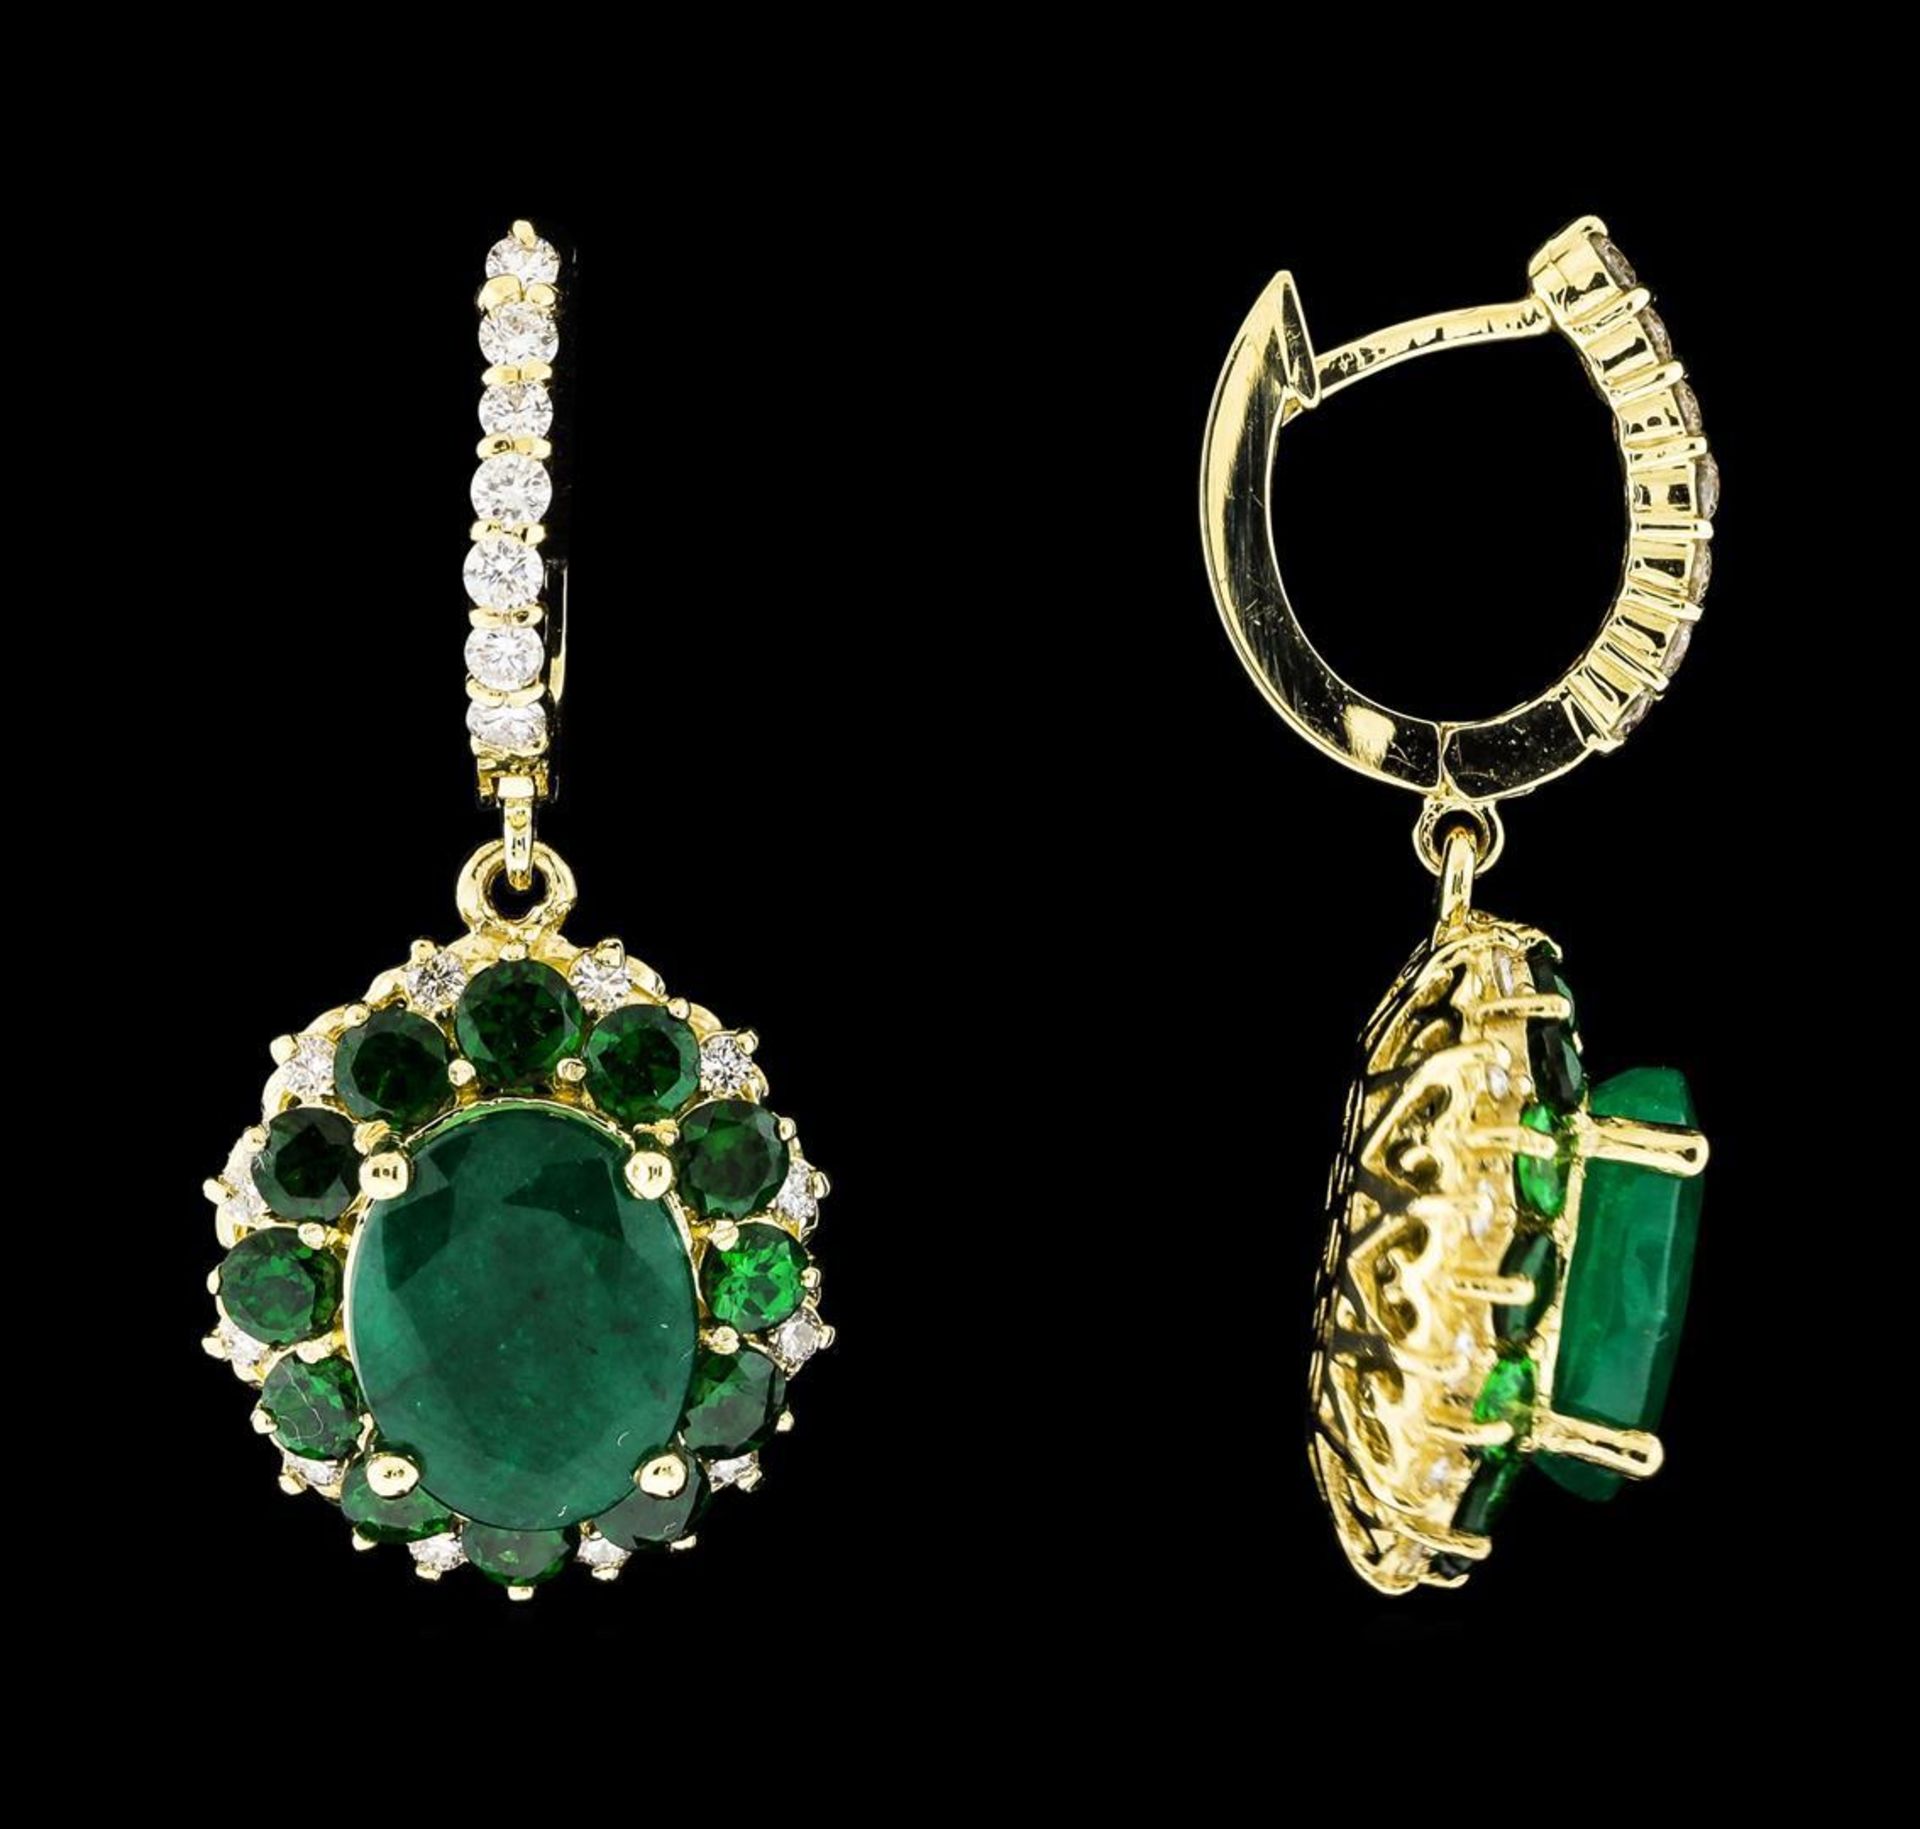 9.71 ctw Emerald and Diamond Earrings - 14KT Yellow Gold - Image 2 of 4